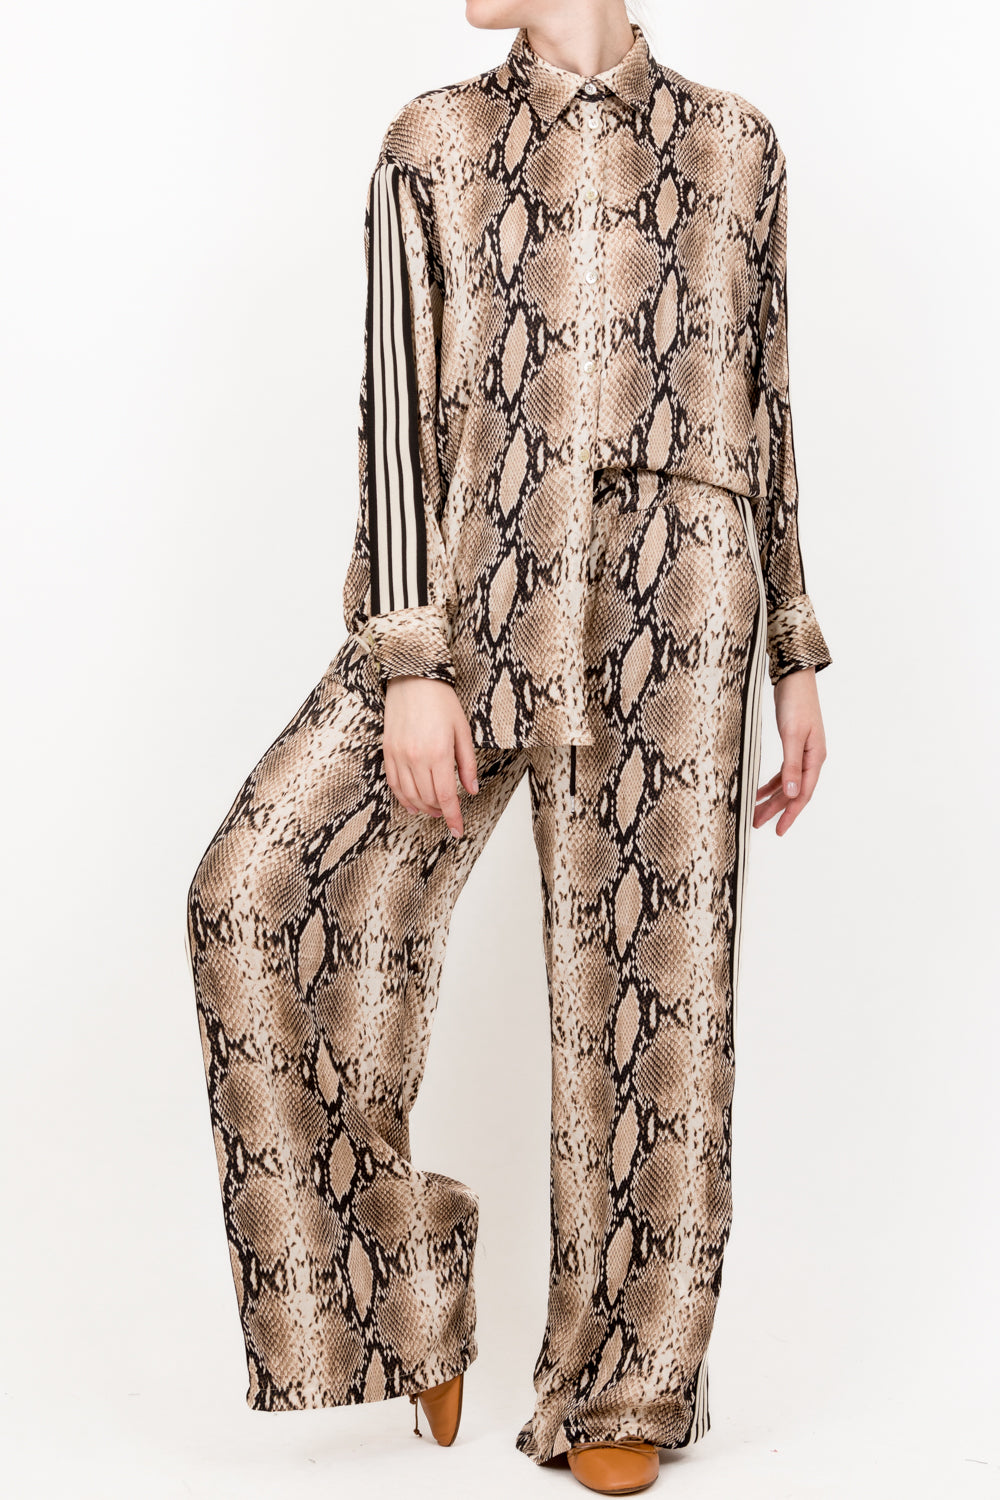 Tensione In - Pantalone animalier con coulisse banda laterale Art. 33634